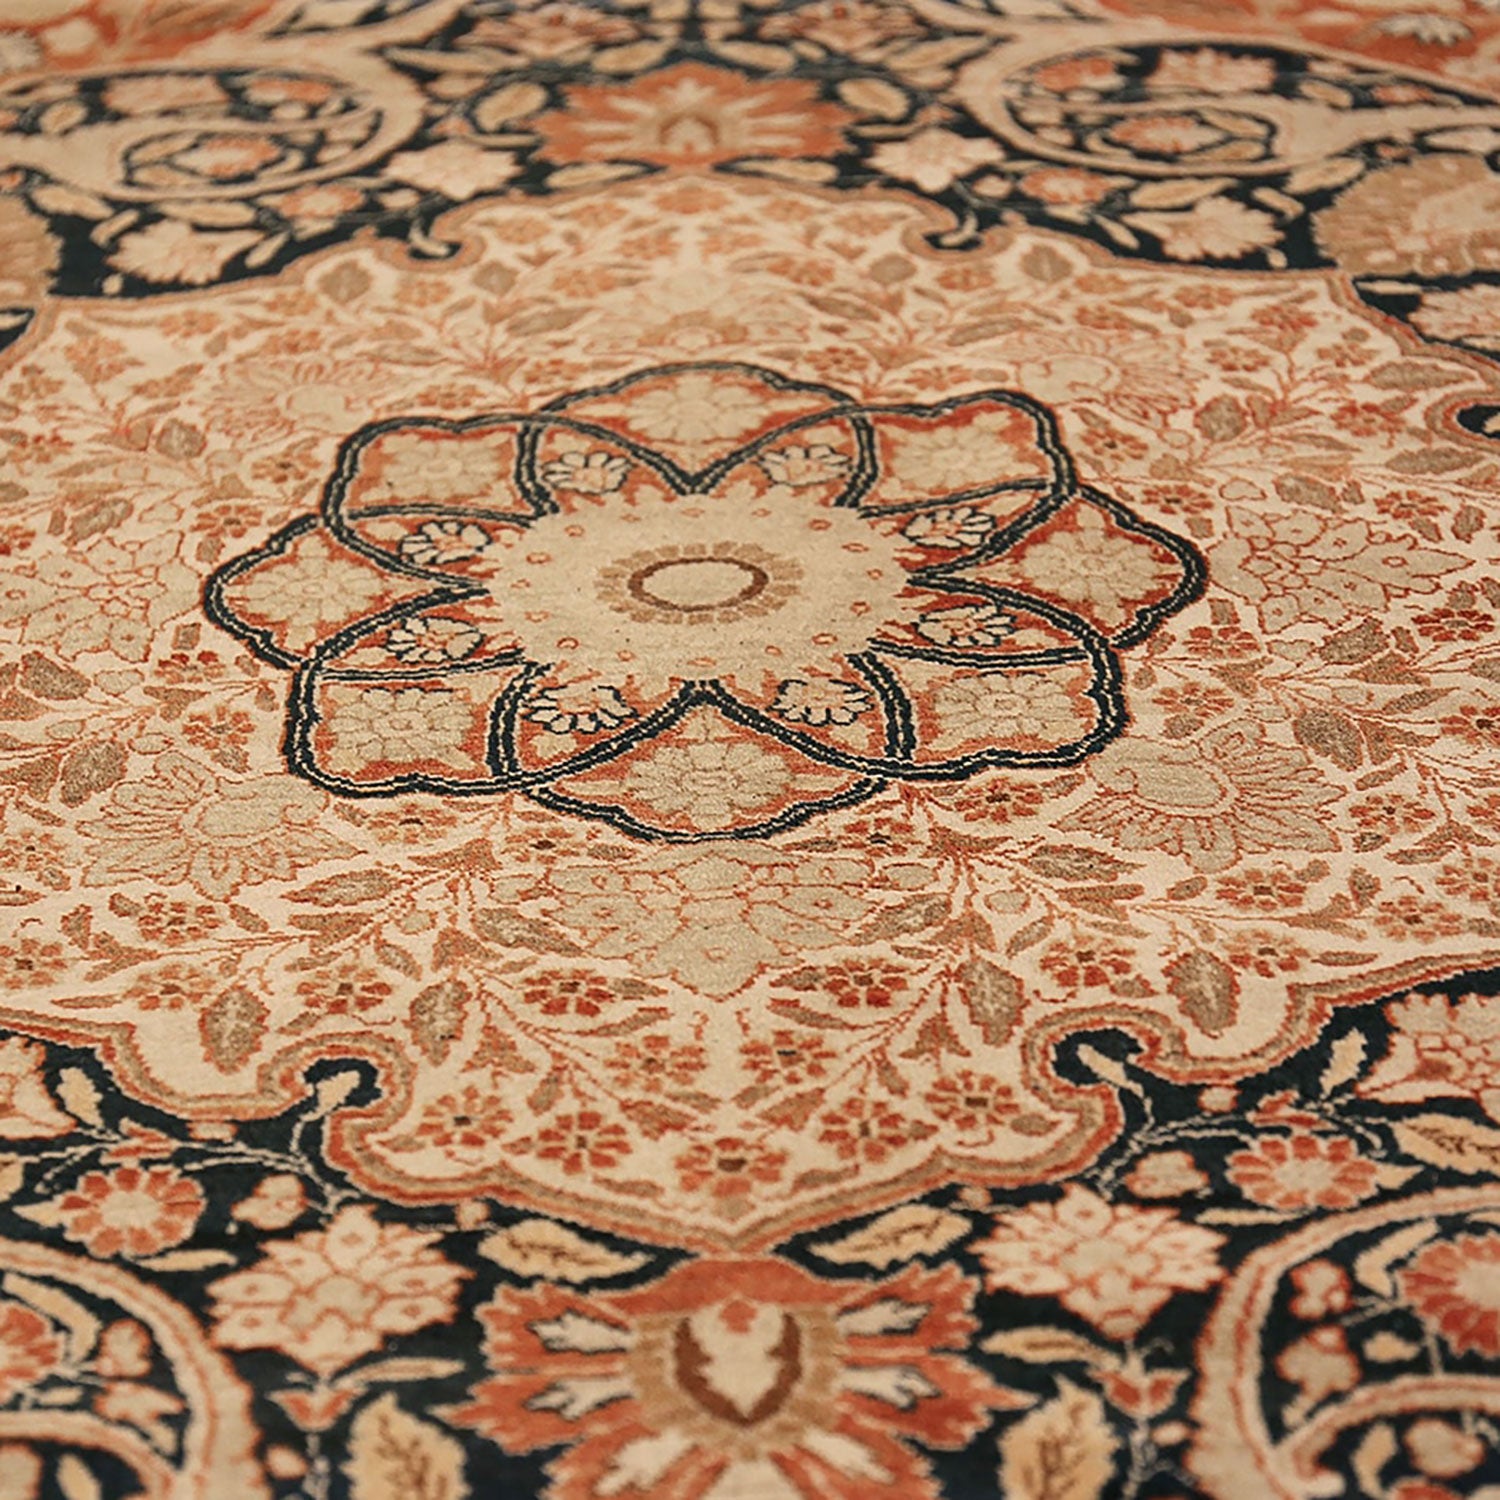 Close-up of an ornate, high-quality handcrafted carpet with floral patterns.